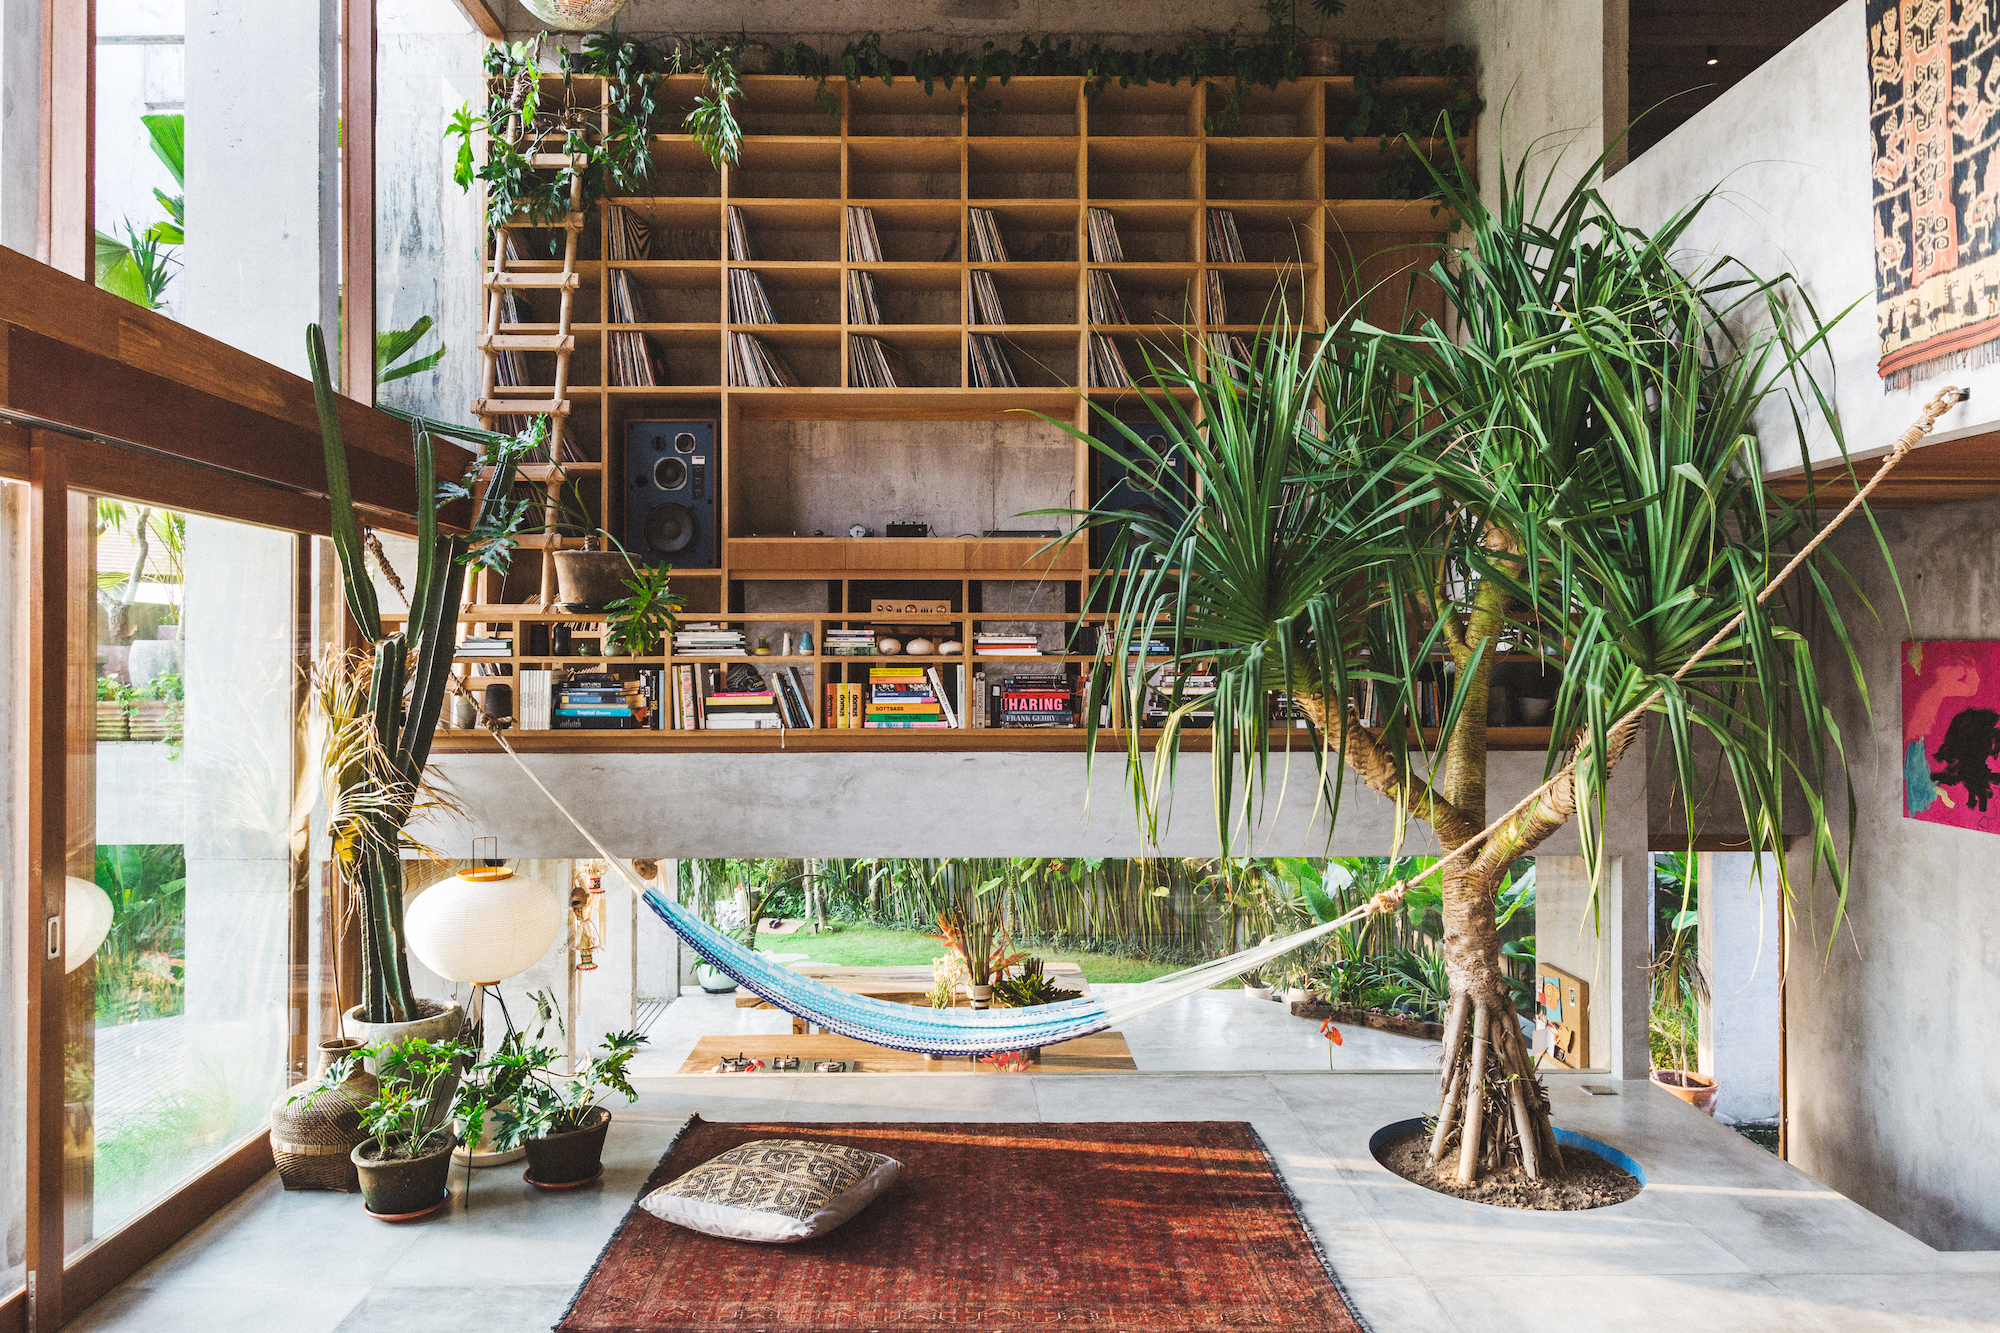 Music storage and split-level living space in the Padang Linjong residence in Bali, Indonesia, created by designer Daniel Mitchell and architect Patisandhika Sidarta - Effect Magazine